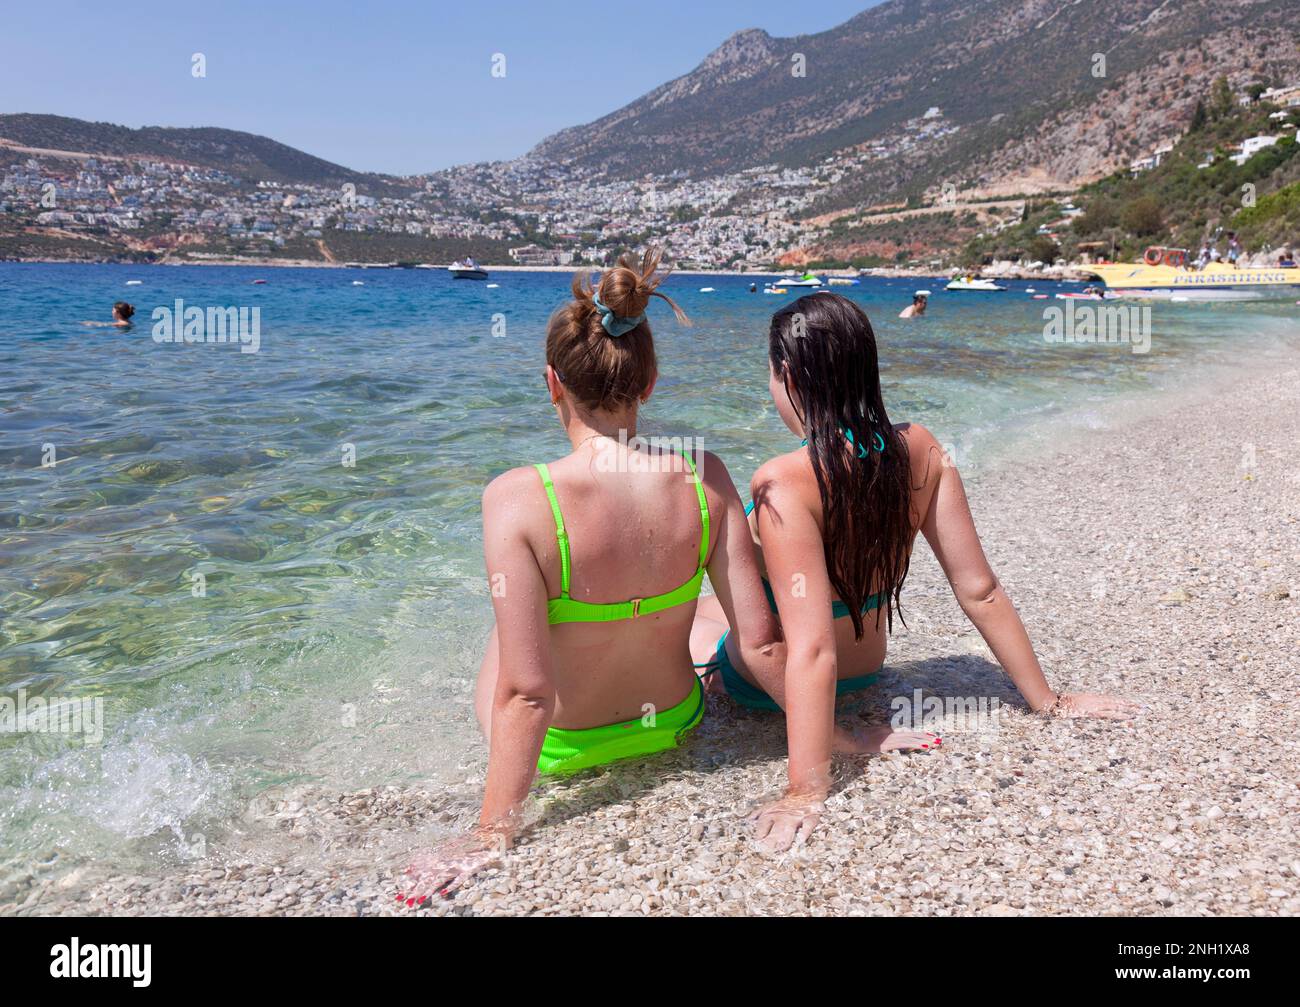 Young women ( model released ) enjoying the clear sea waters and beach at the Kalkan Beach park in Kalkan, Turkey. July 2022 Stock Photo